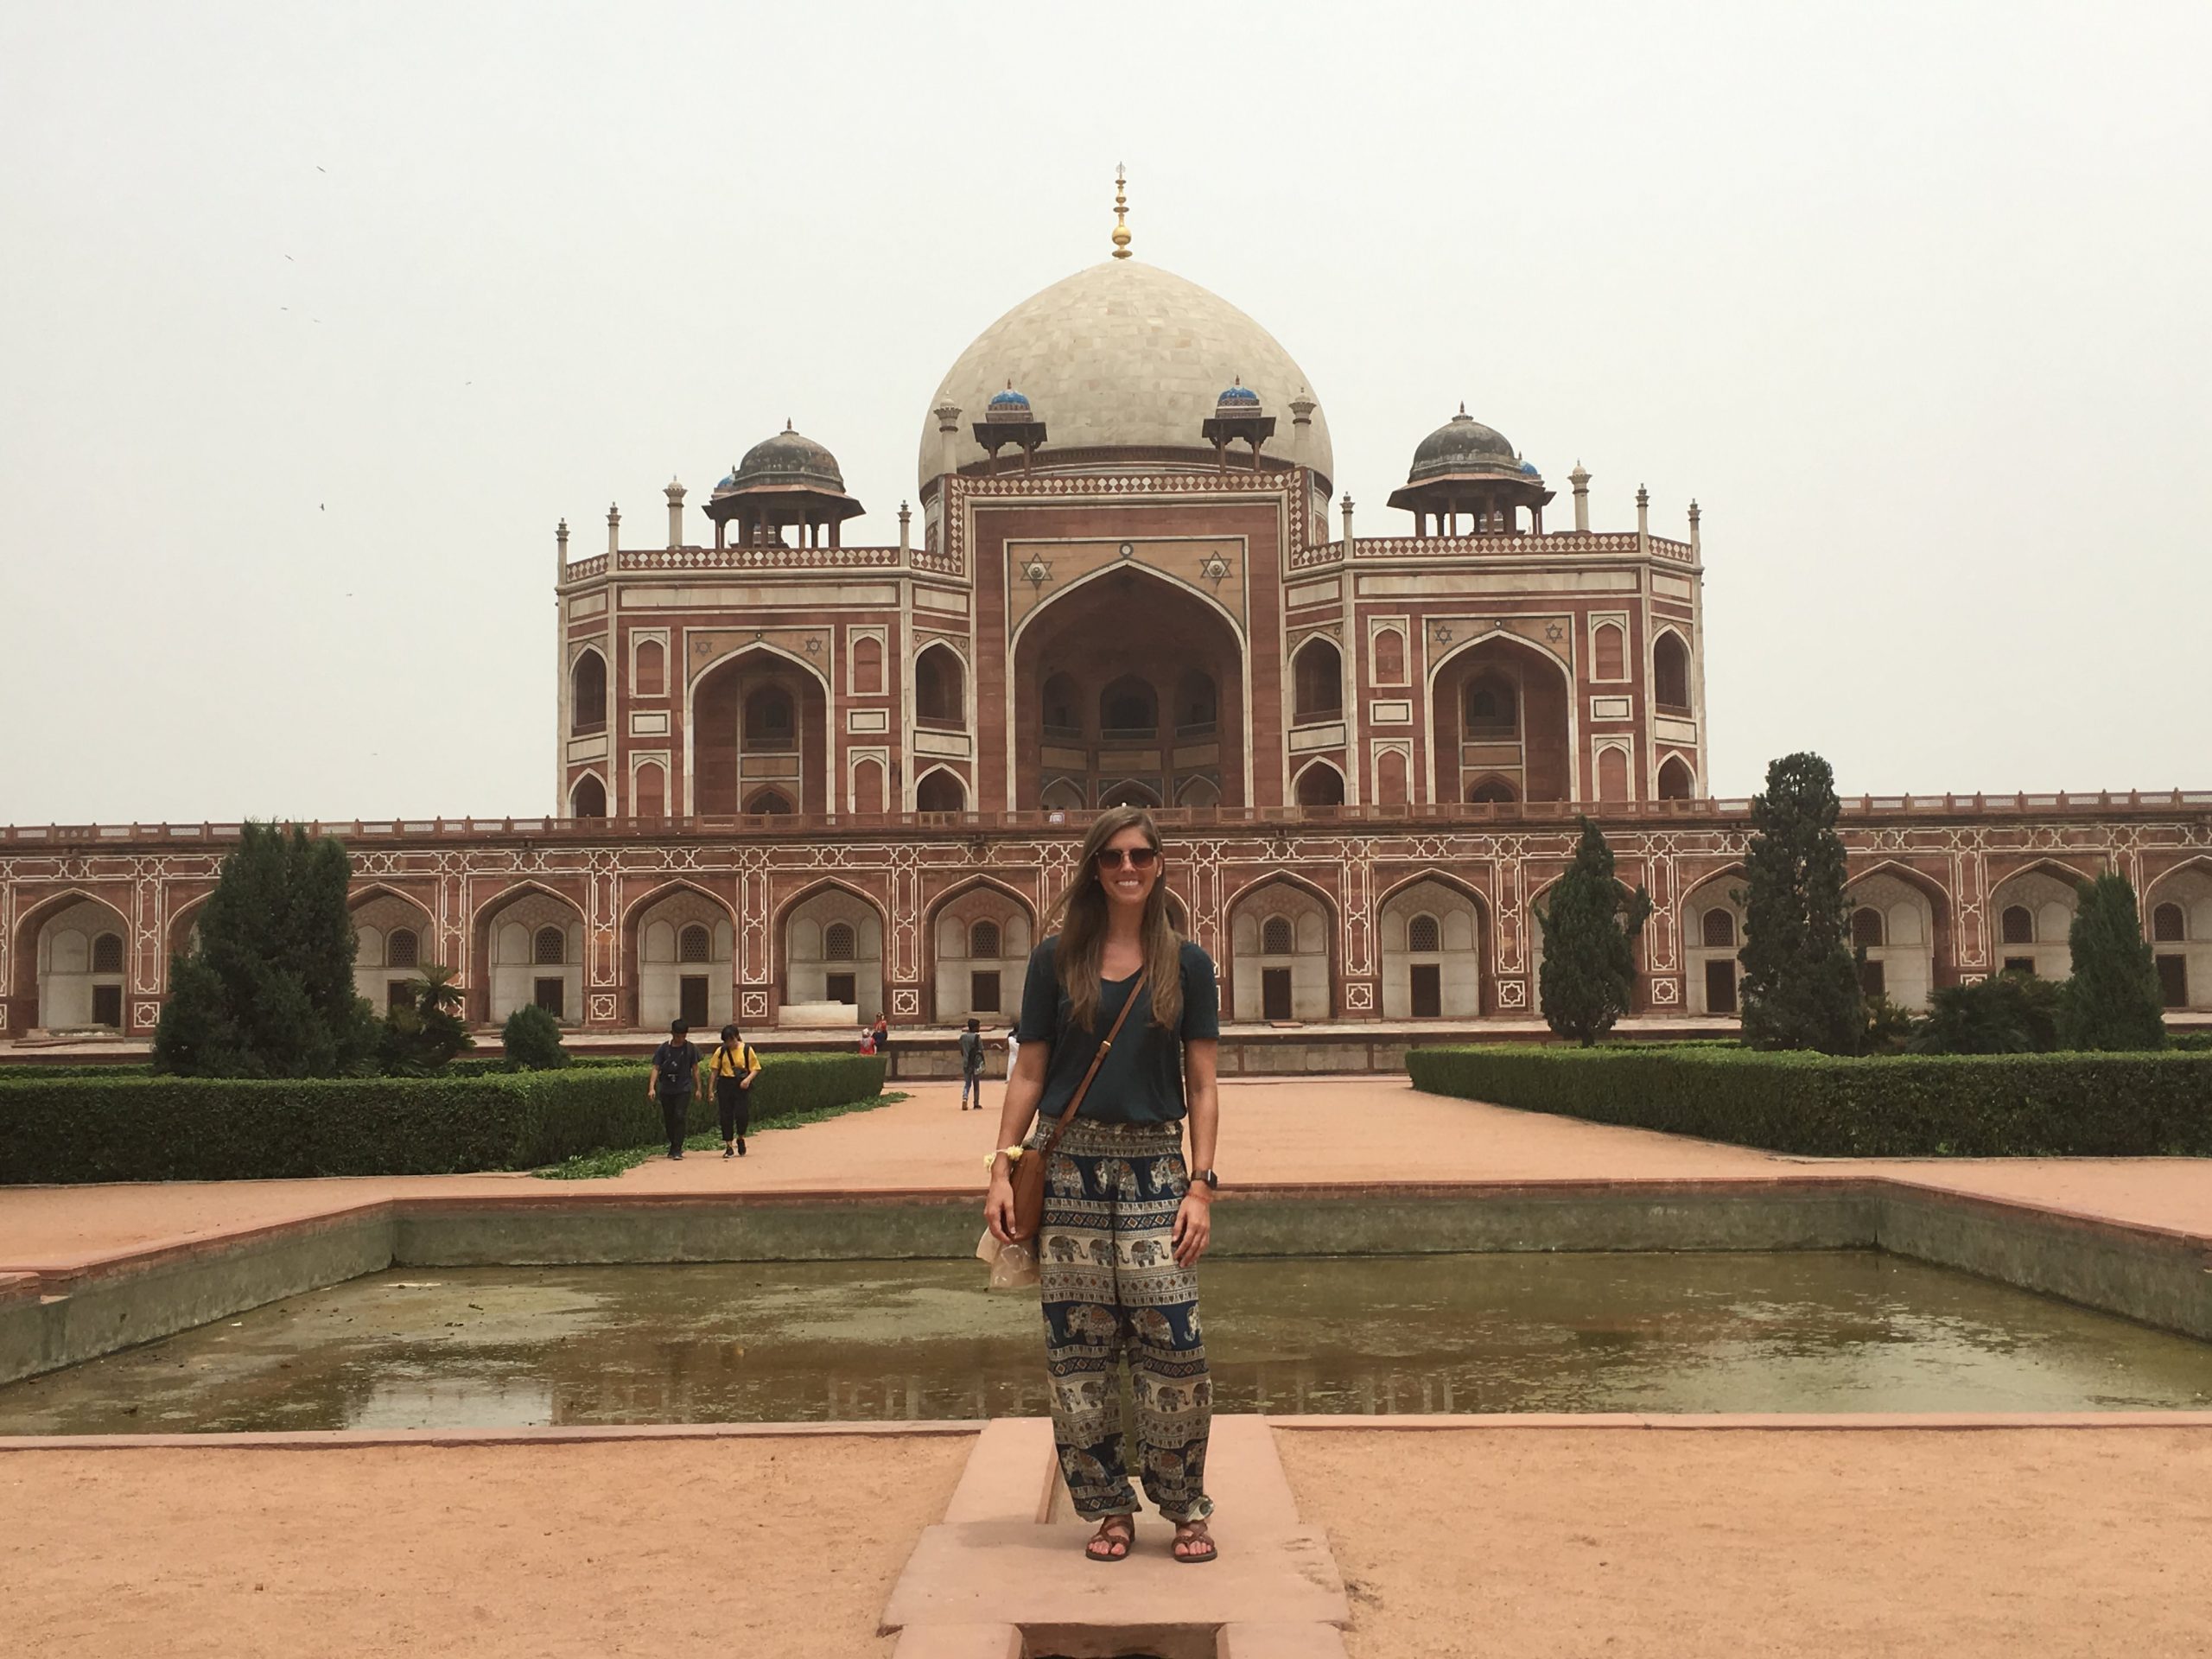 Sara at Humayun’s Tomb on her first trip to Delhi